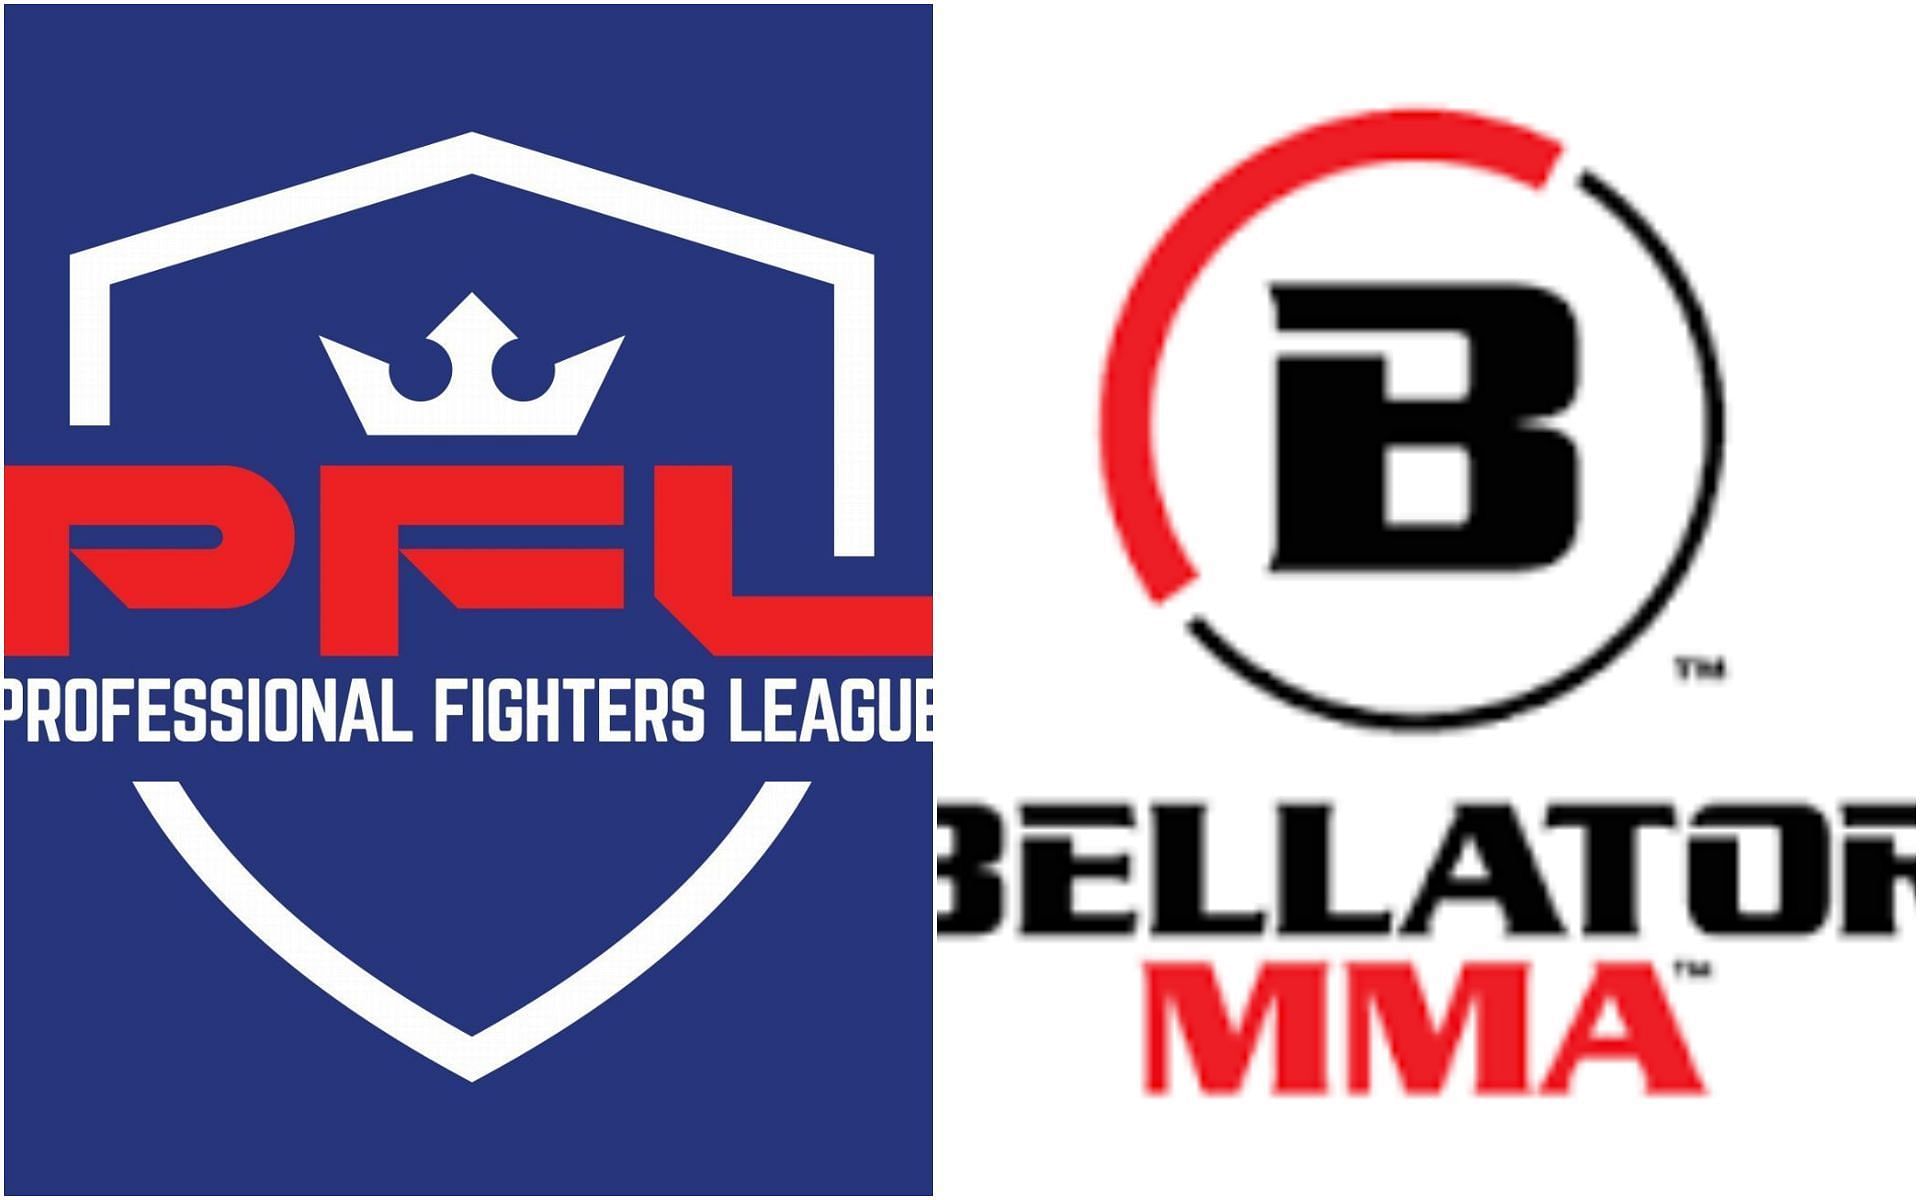 PFL is rumored to be buying Bellator